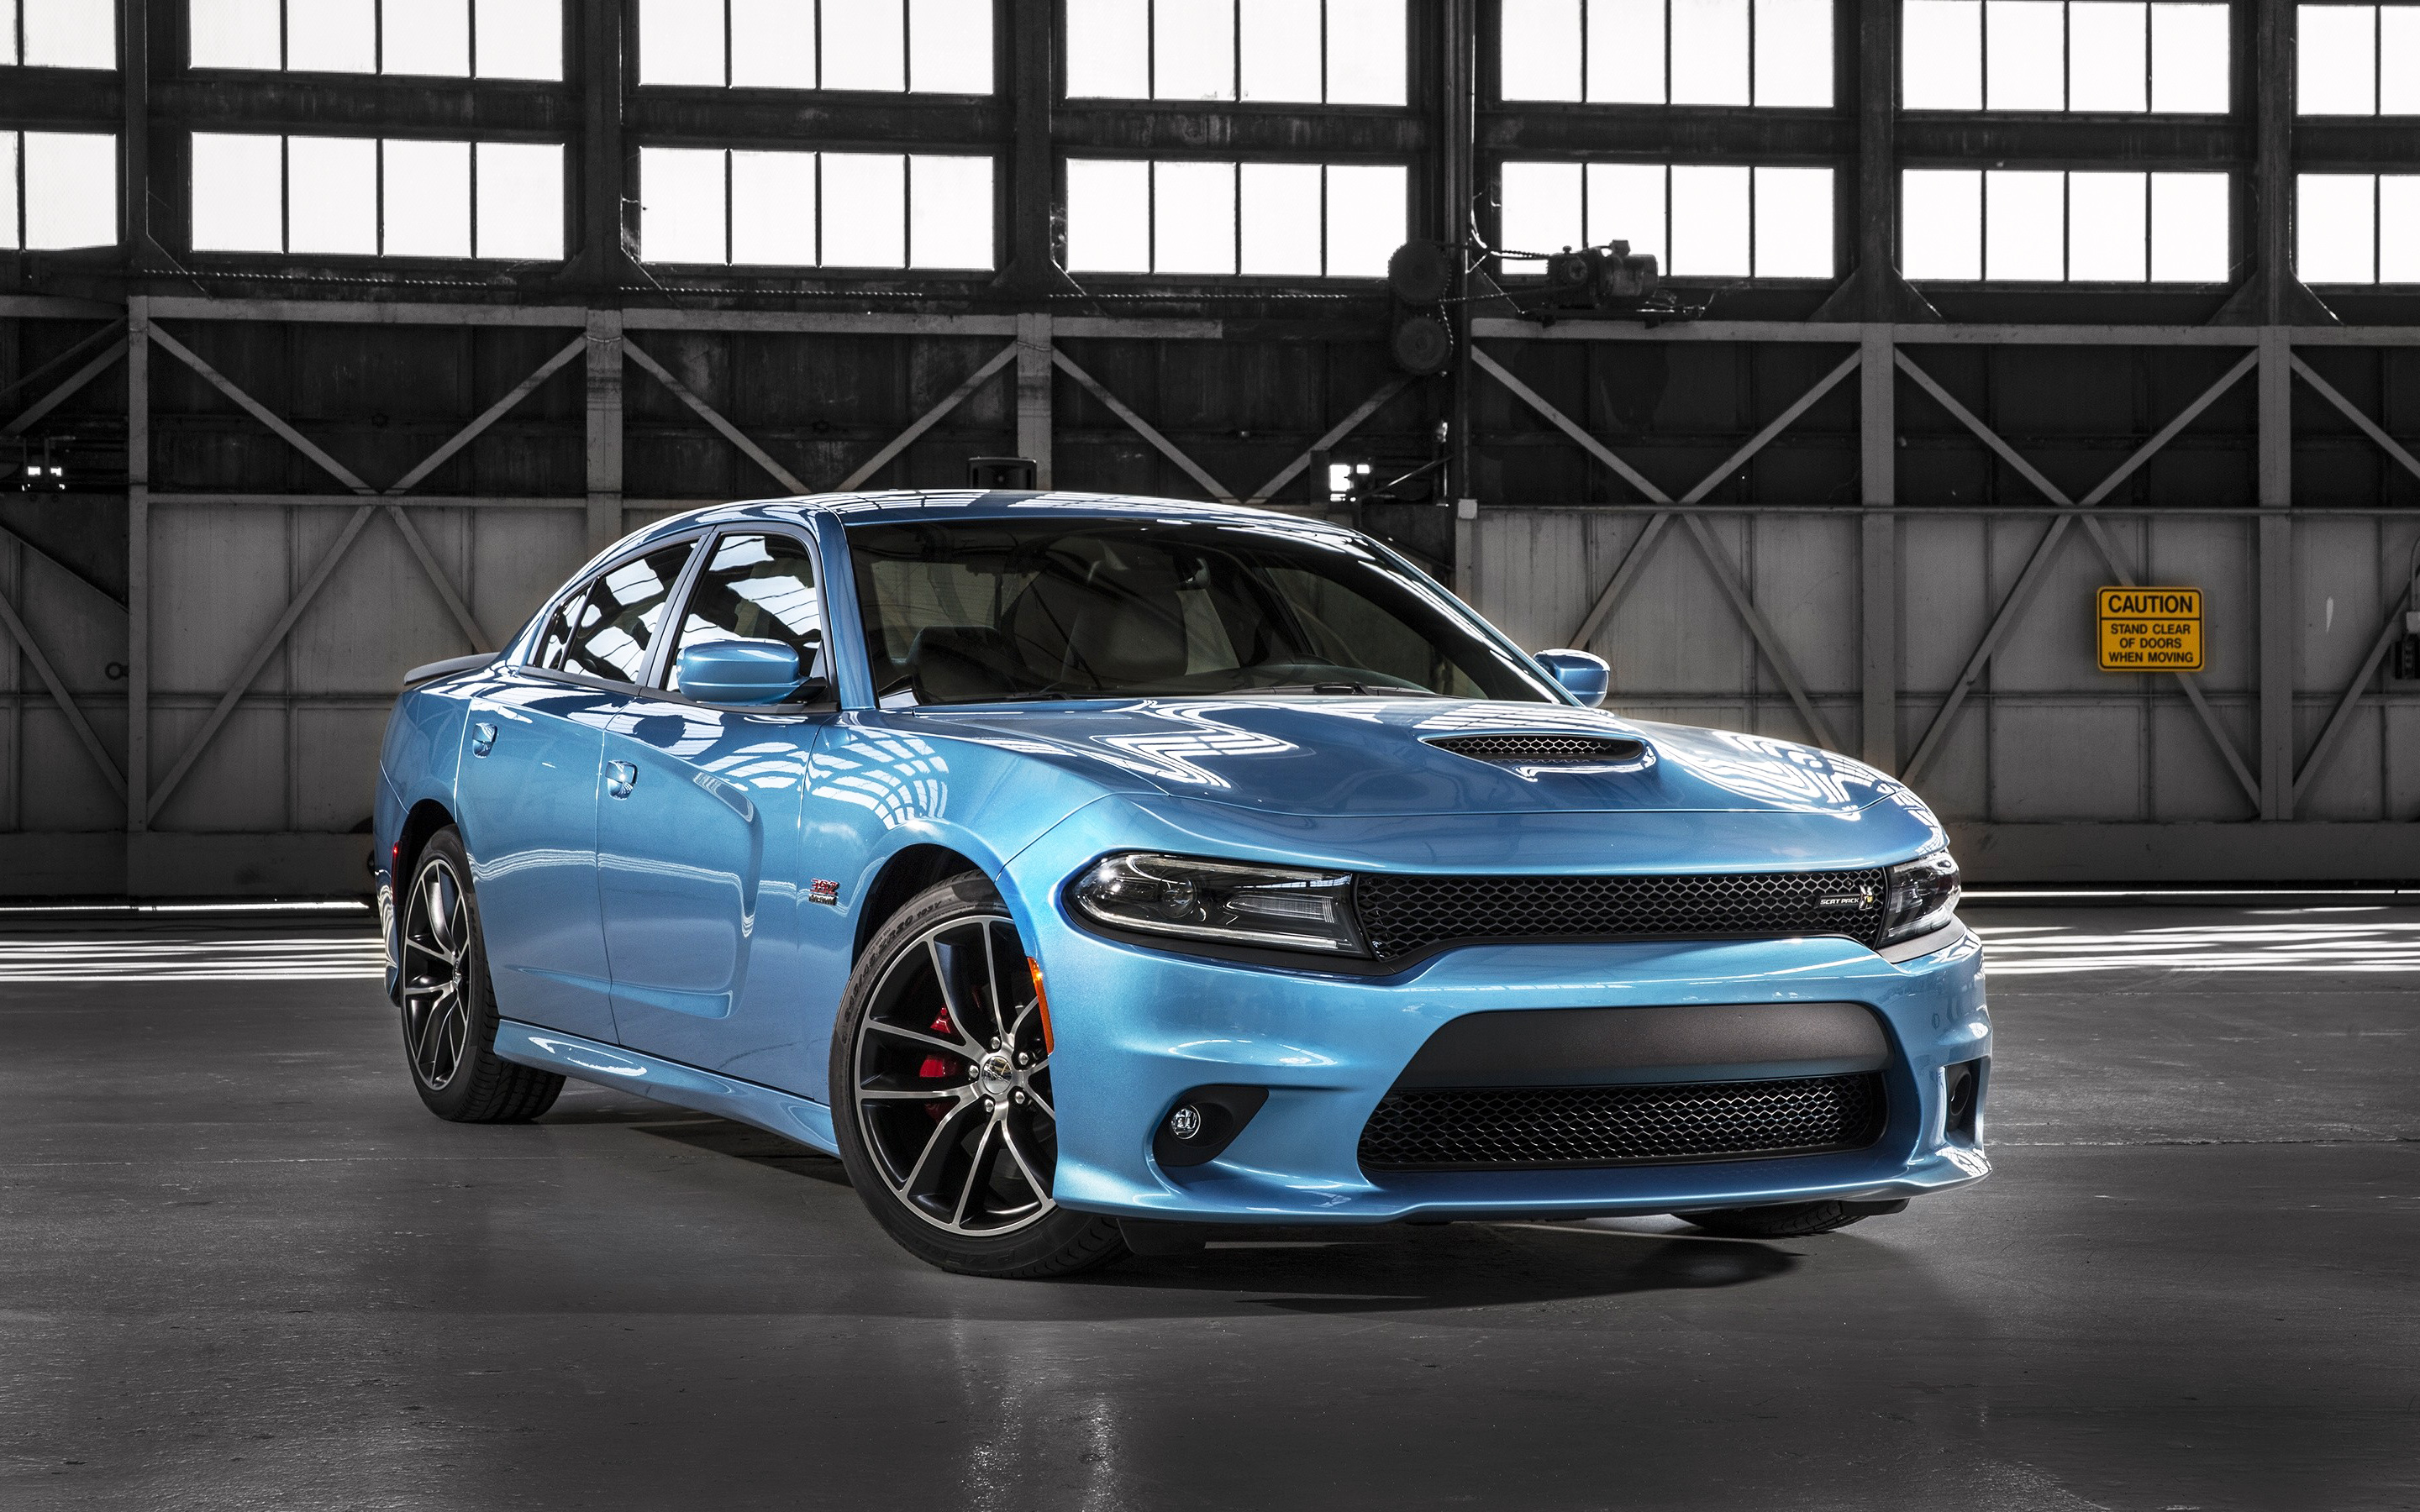 2015 Dodge Charger RT Scat Pack Wallpaper | HD Car ...